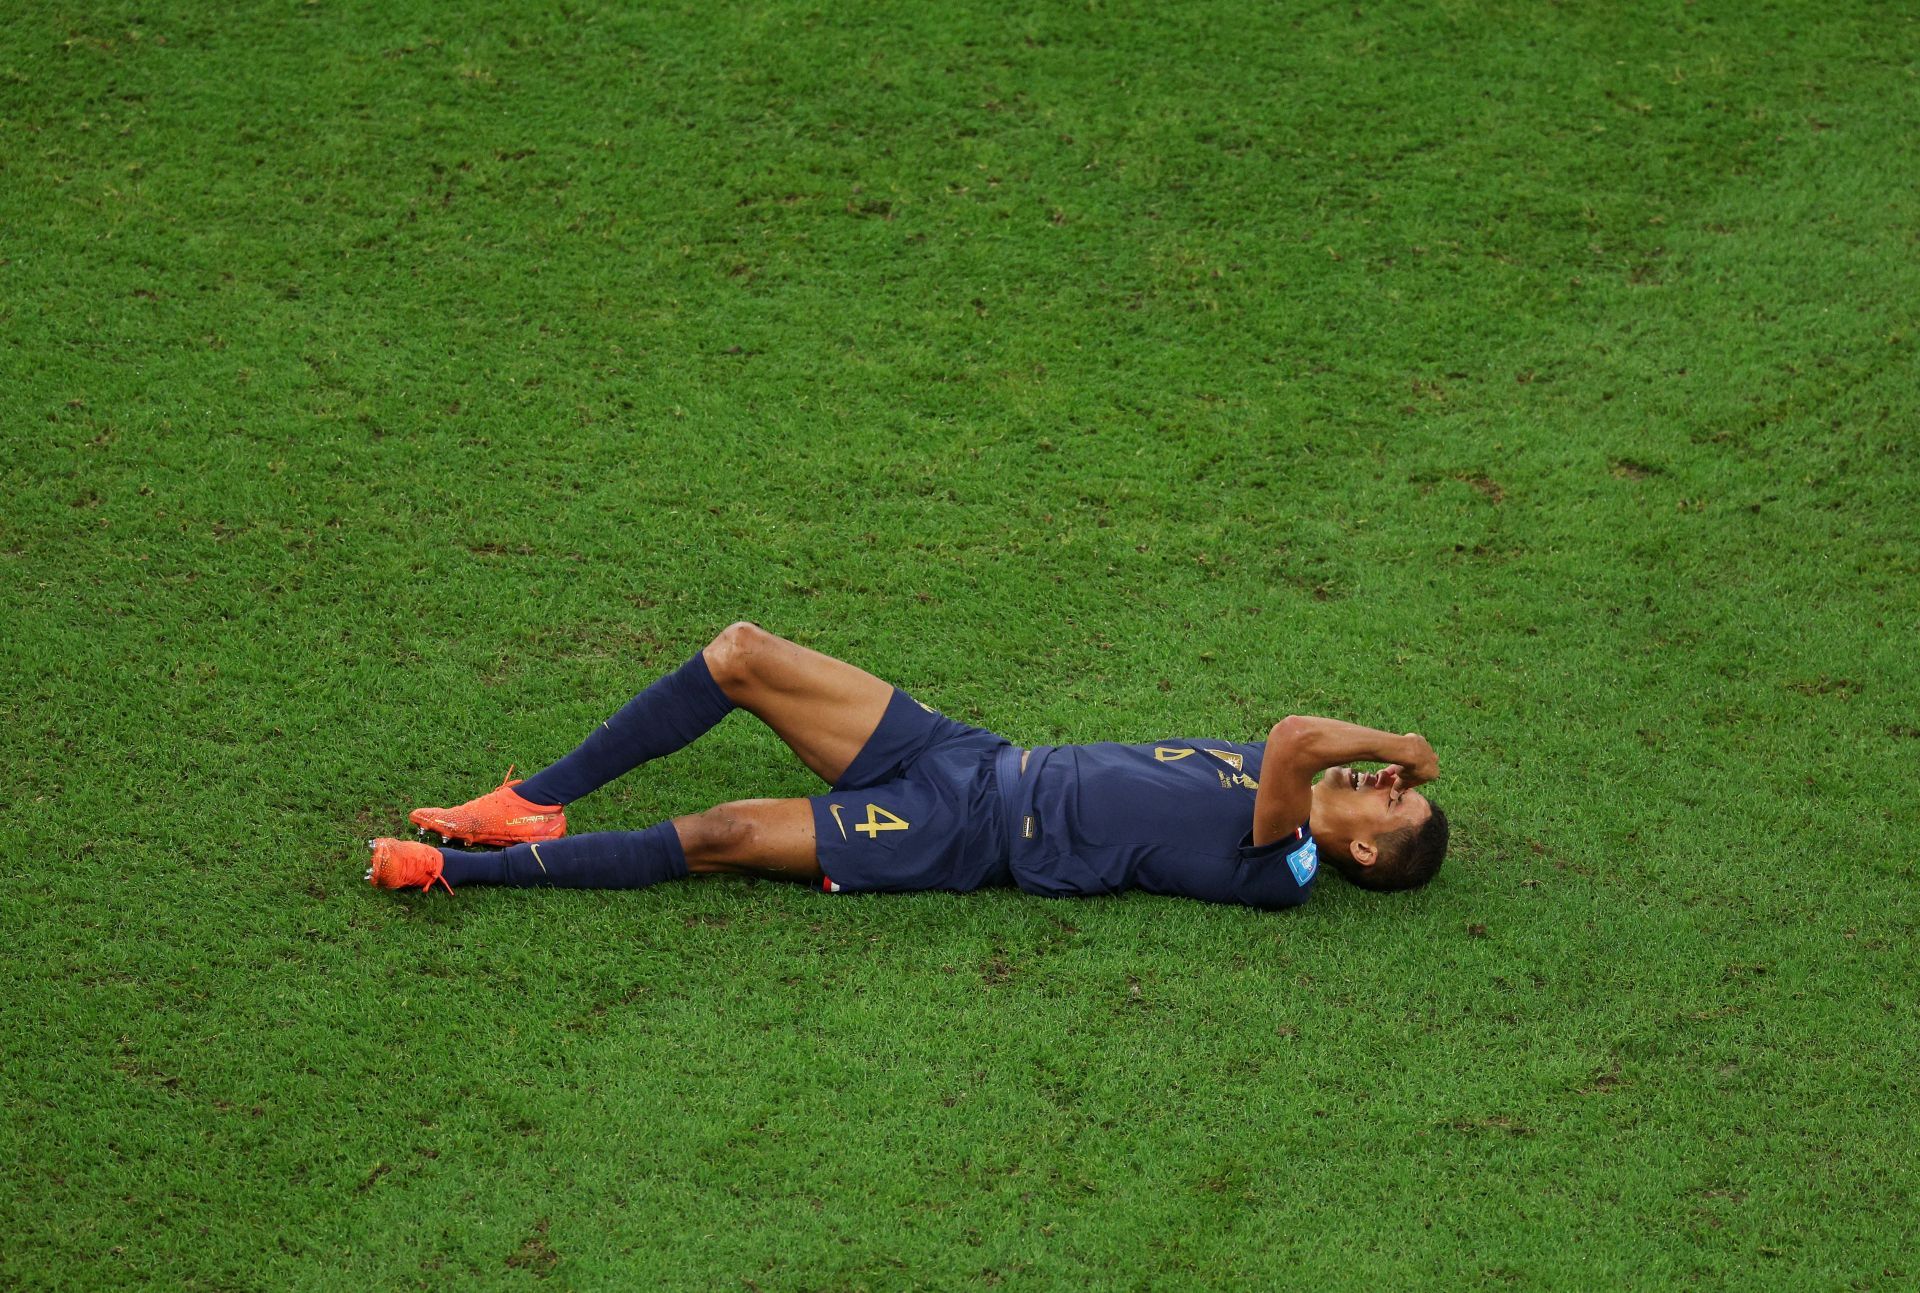 Heartbreak for Varane and Co. as they lost to Argentina.